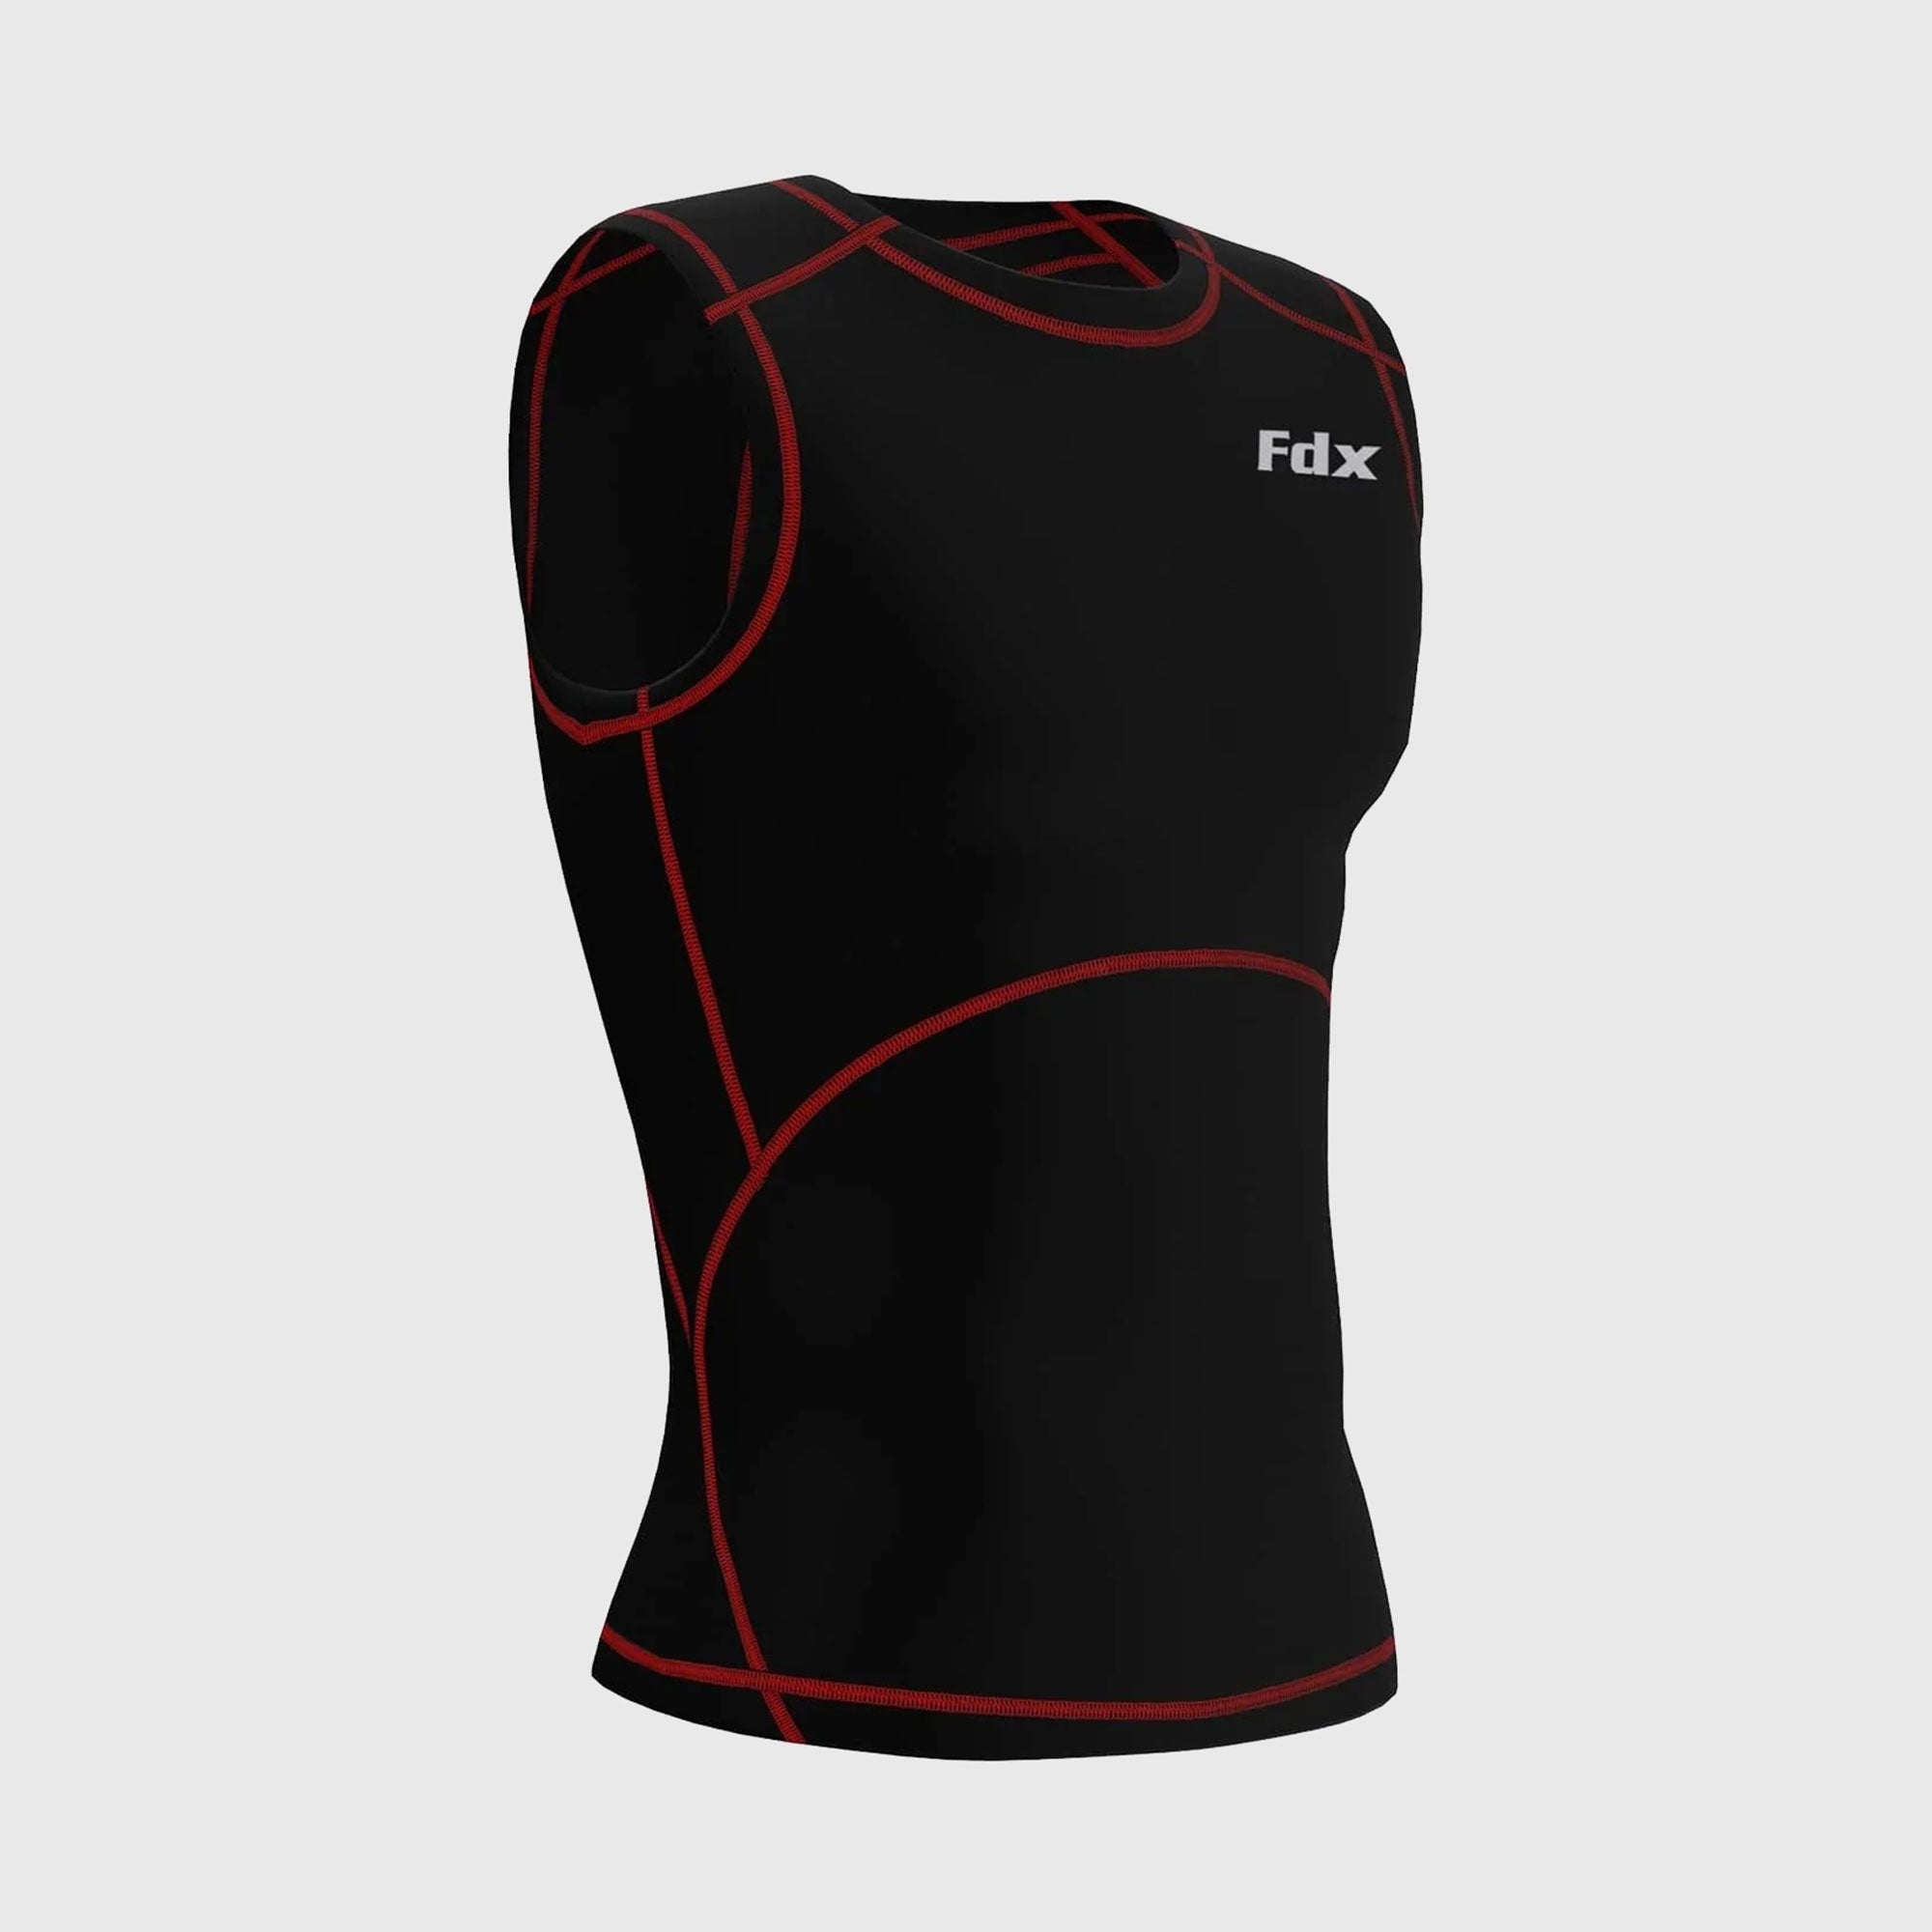 Fdx Compression Sleeveless Top for Men's Red & Black Running Gym Workout Wear Rash Guard Stretchable Breathable - Aeroform